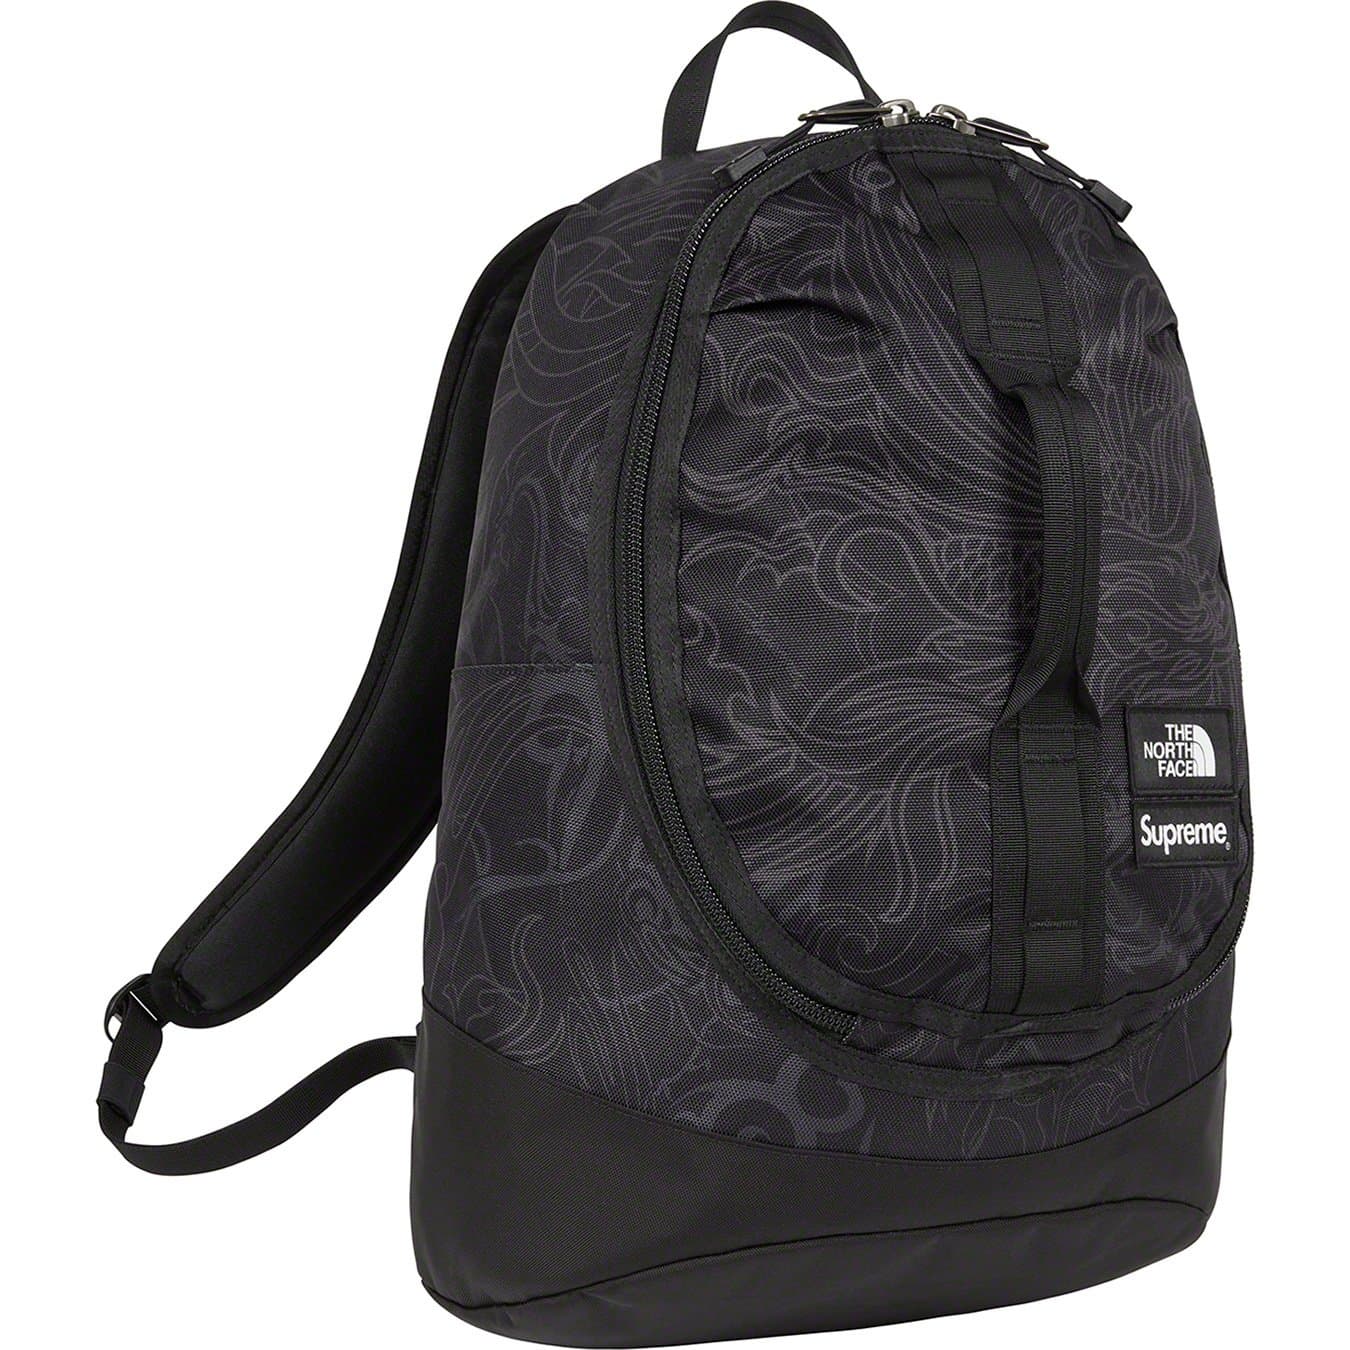 Supreme / The North Face Steep Tech Backpack Black Dragon